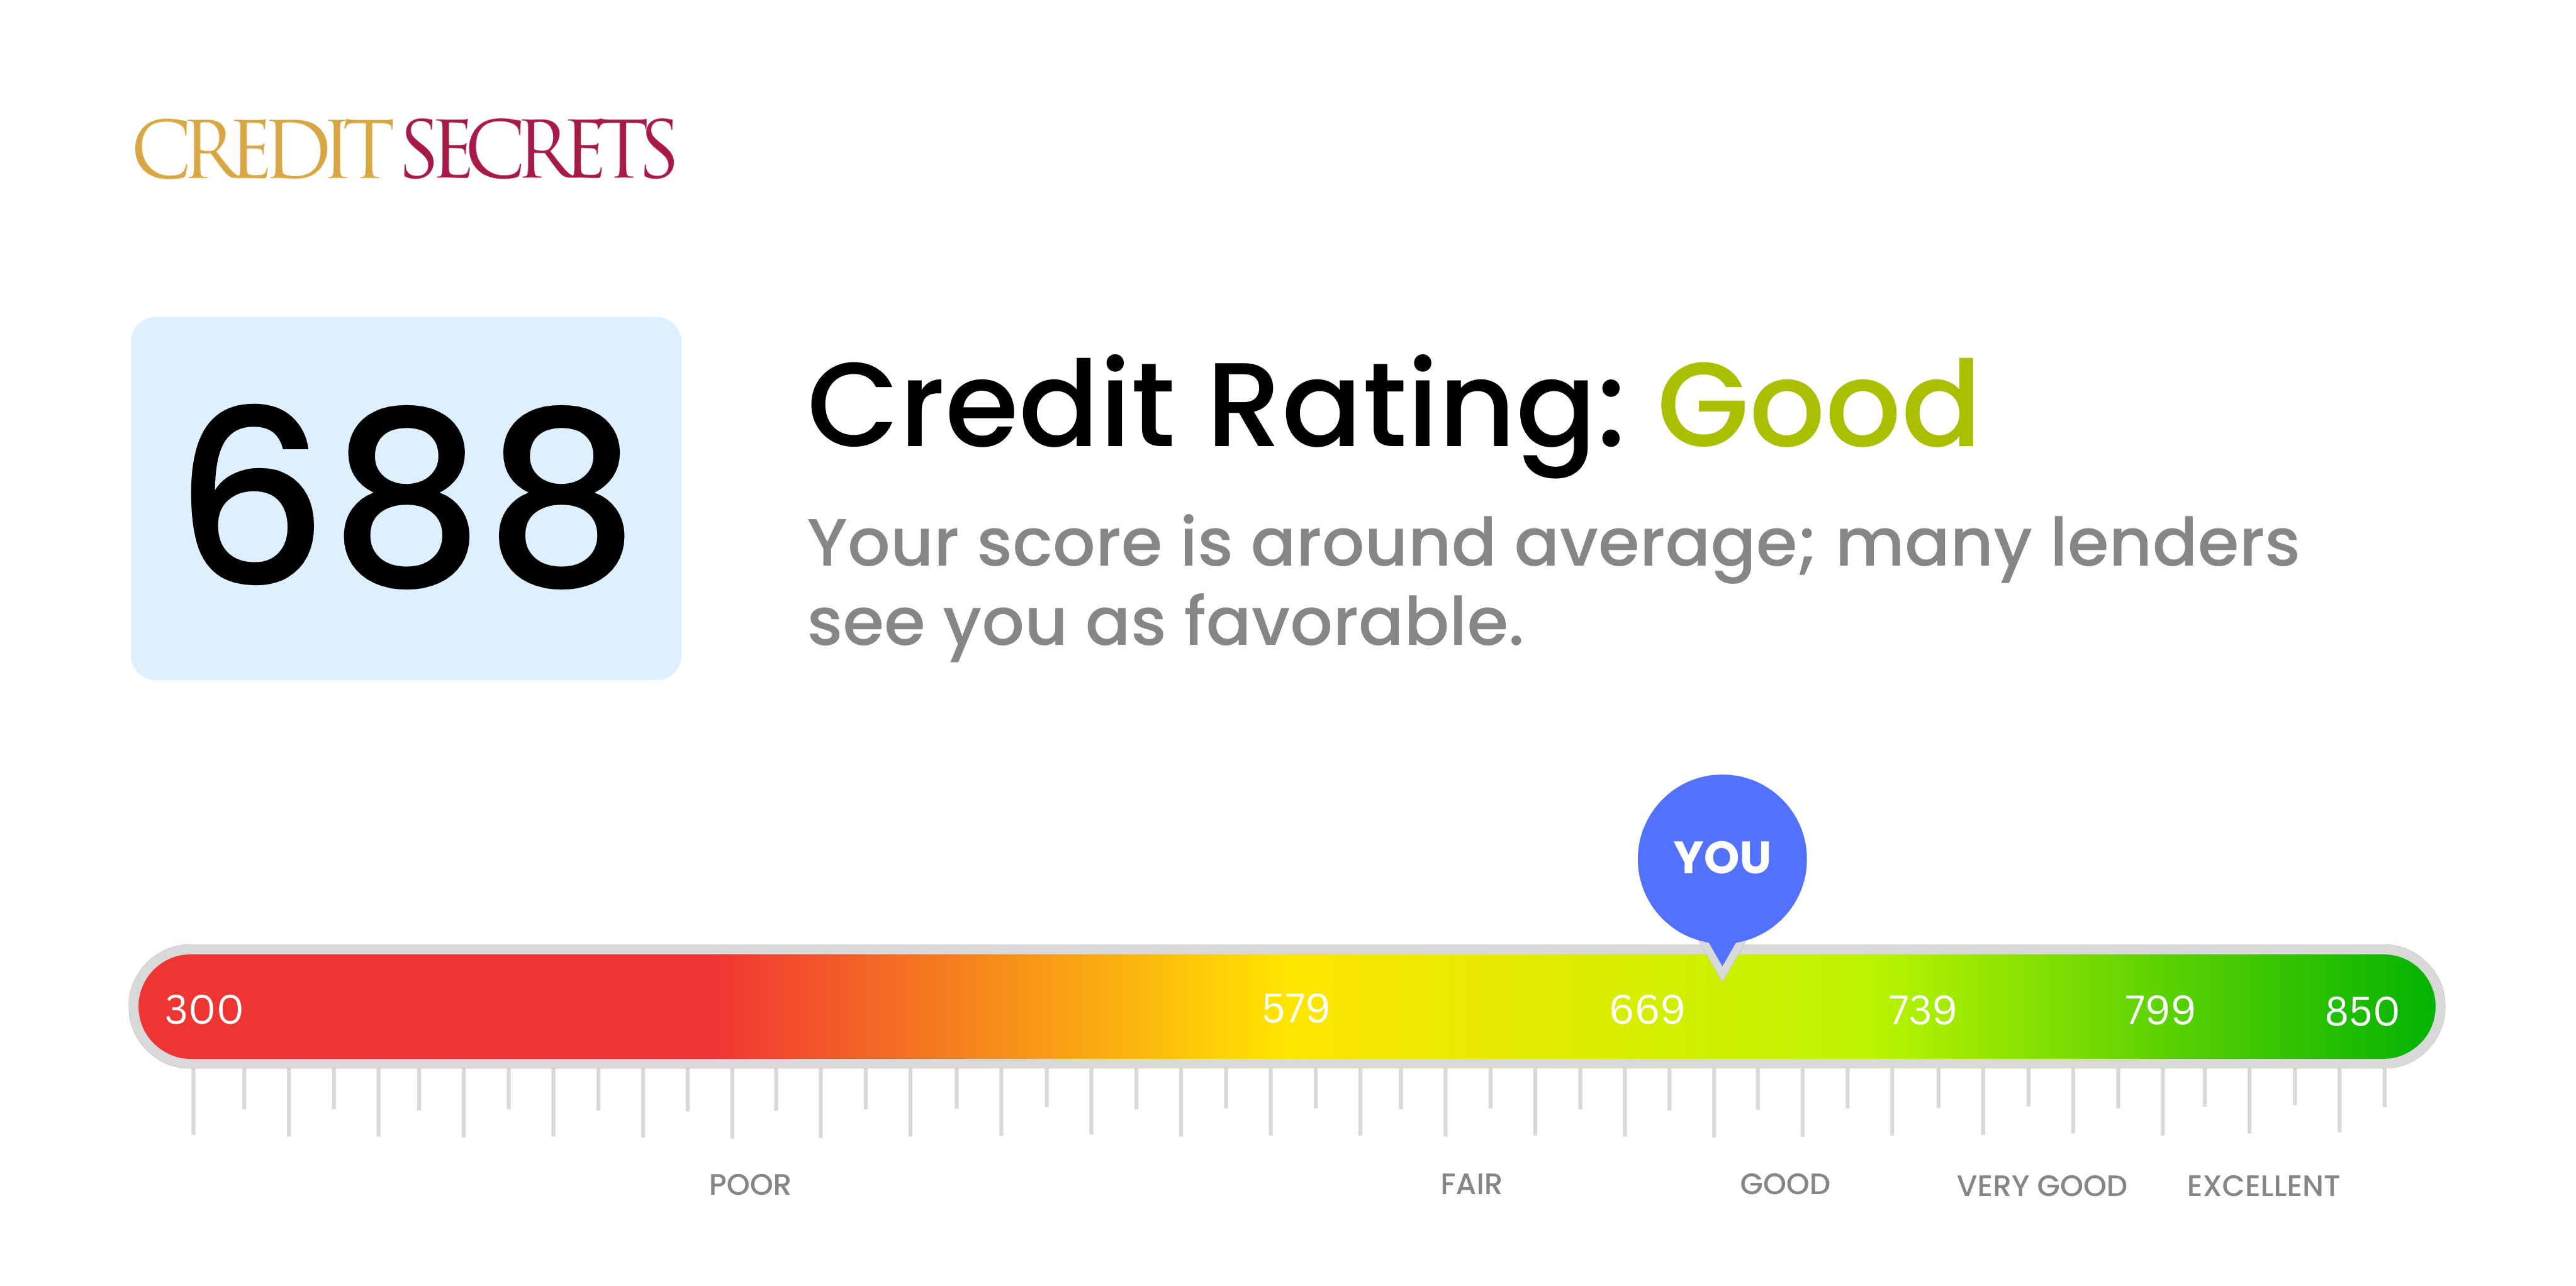 Is 688 a good credit score?